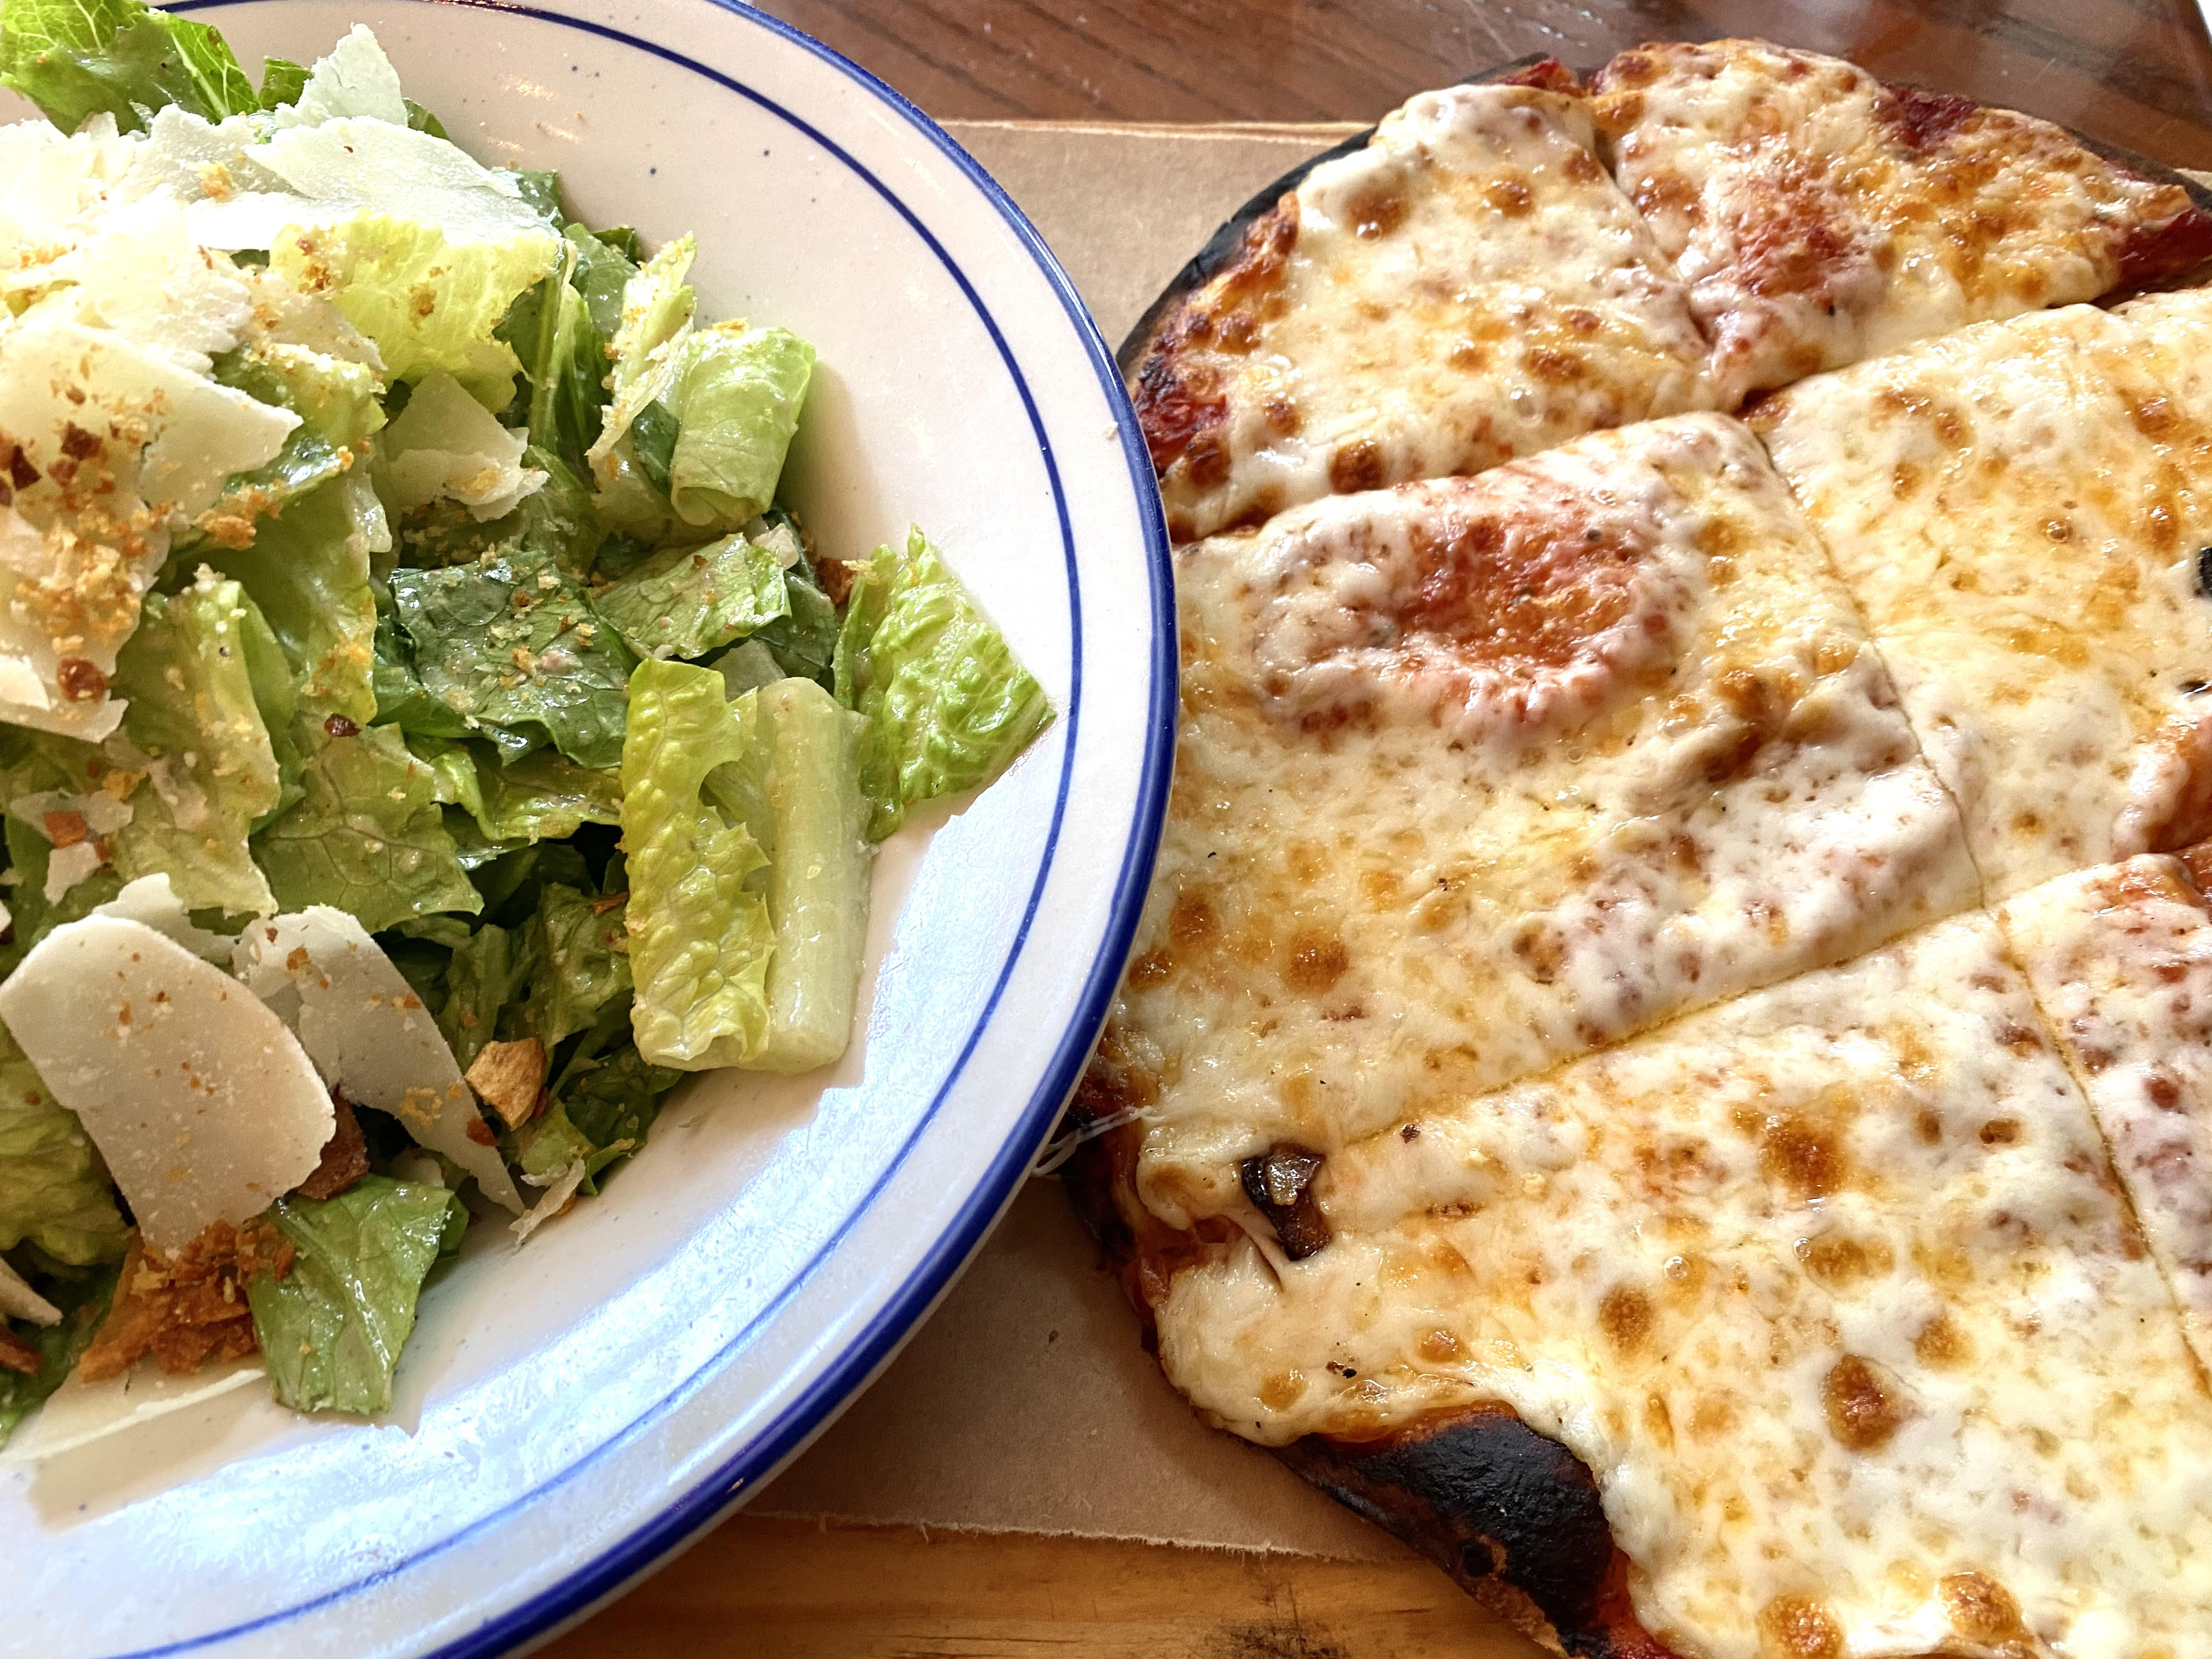 Eno's Pizza Tavern in the Bishop Arts District, Oak Cliff has a great lunch special